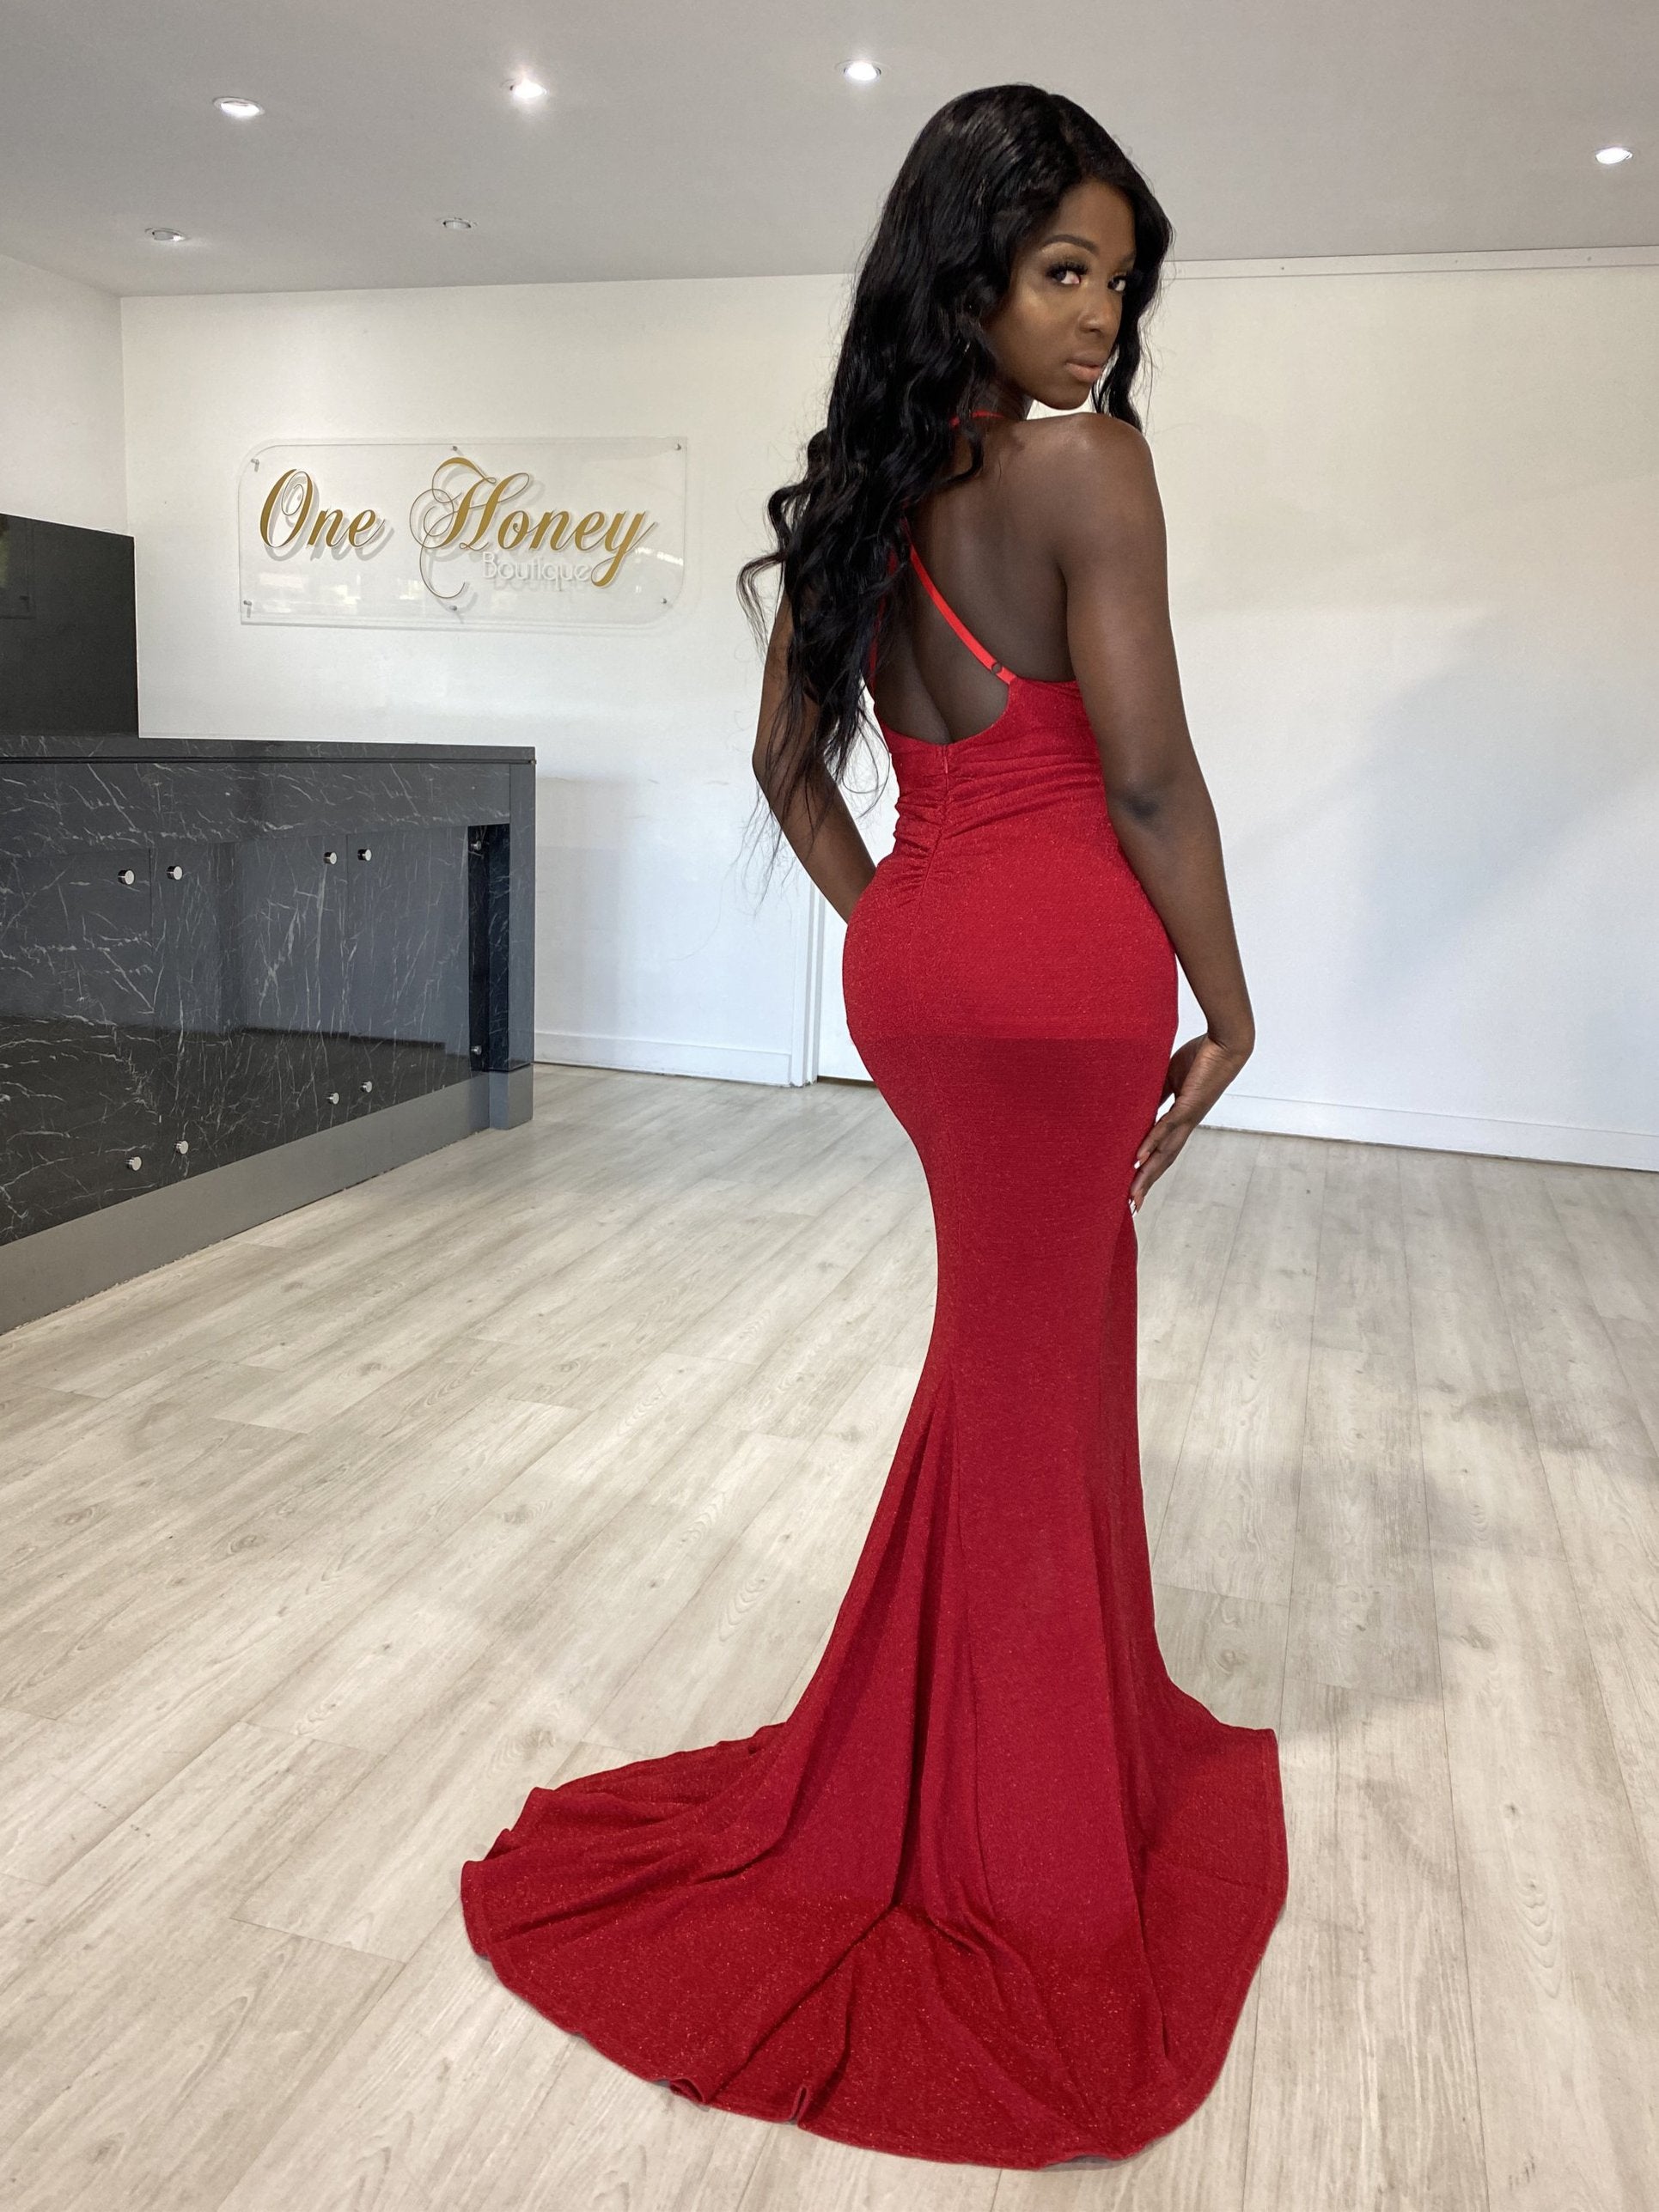 Honey Couture LUREX Red Sparkle Mermaid Evening Gown Dress